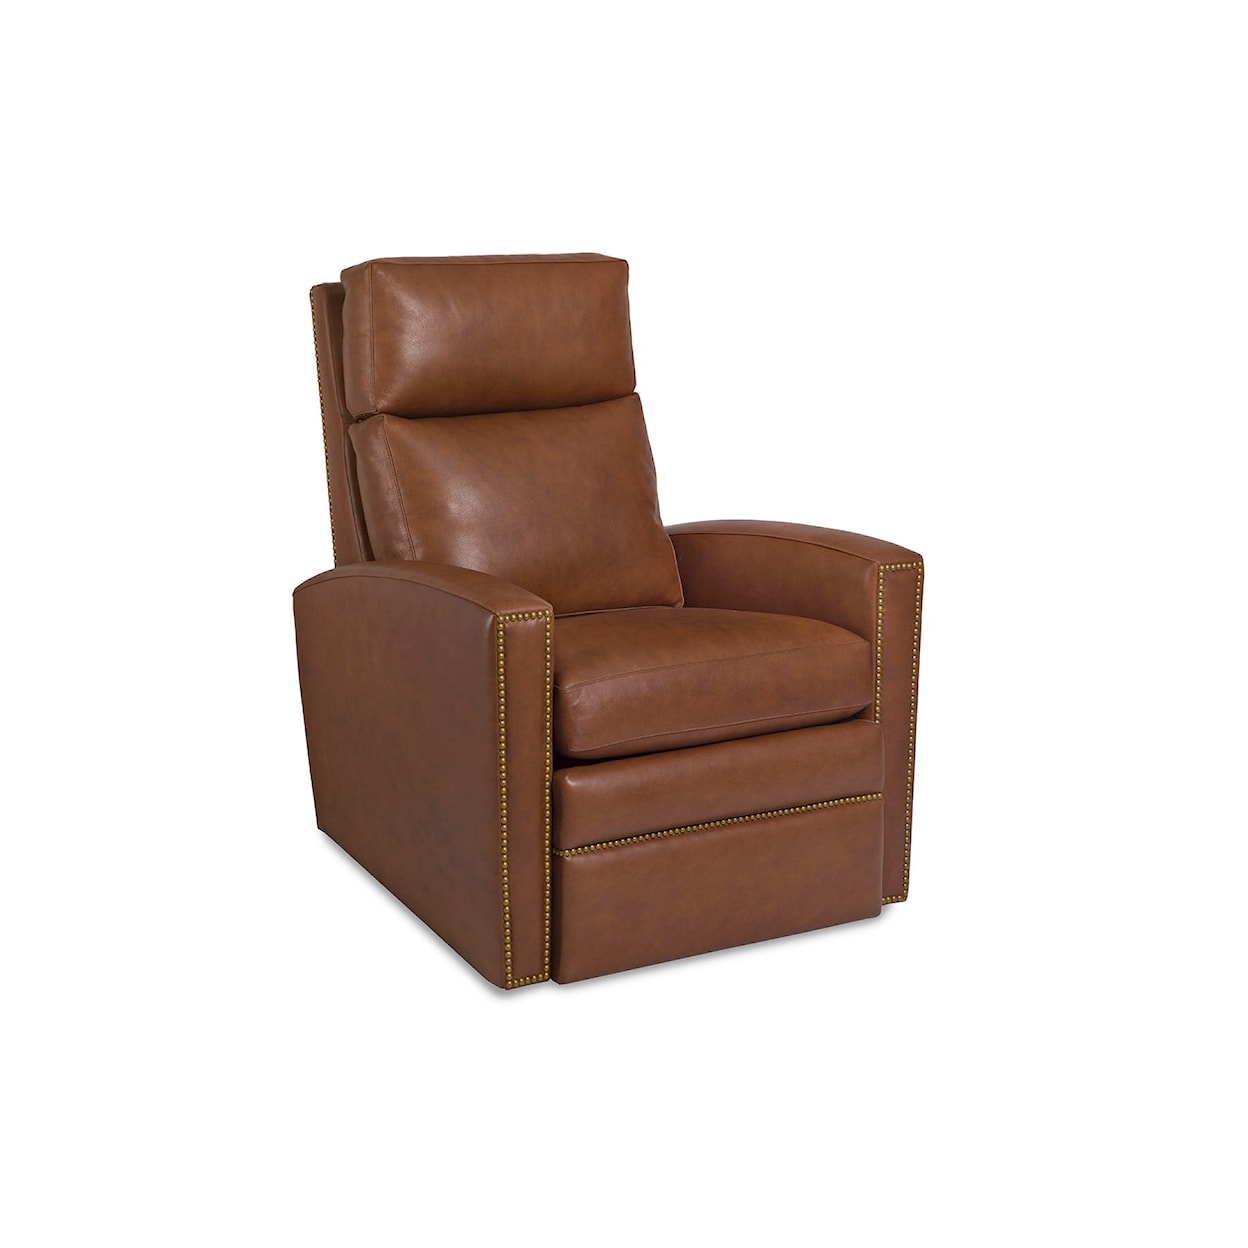 Hancock and Moore Acclaim Acclaim Power Recliner